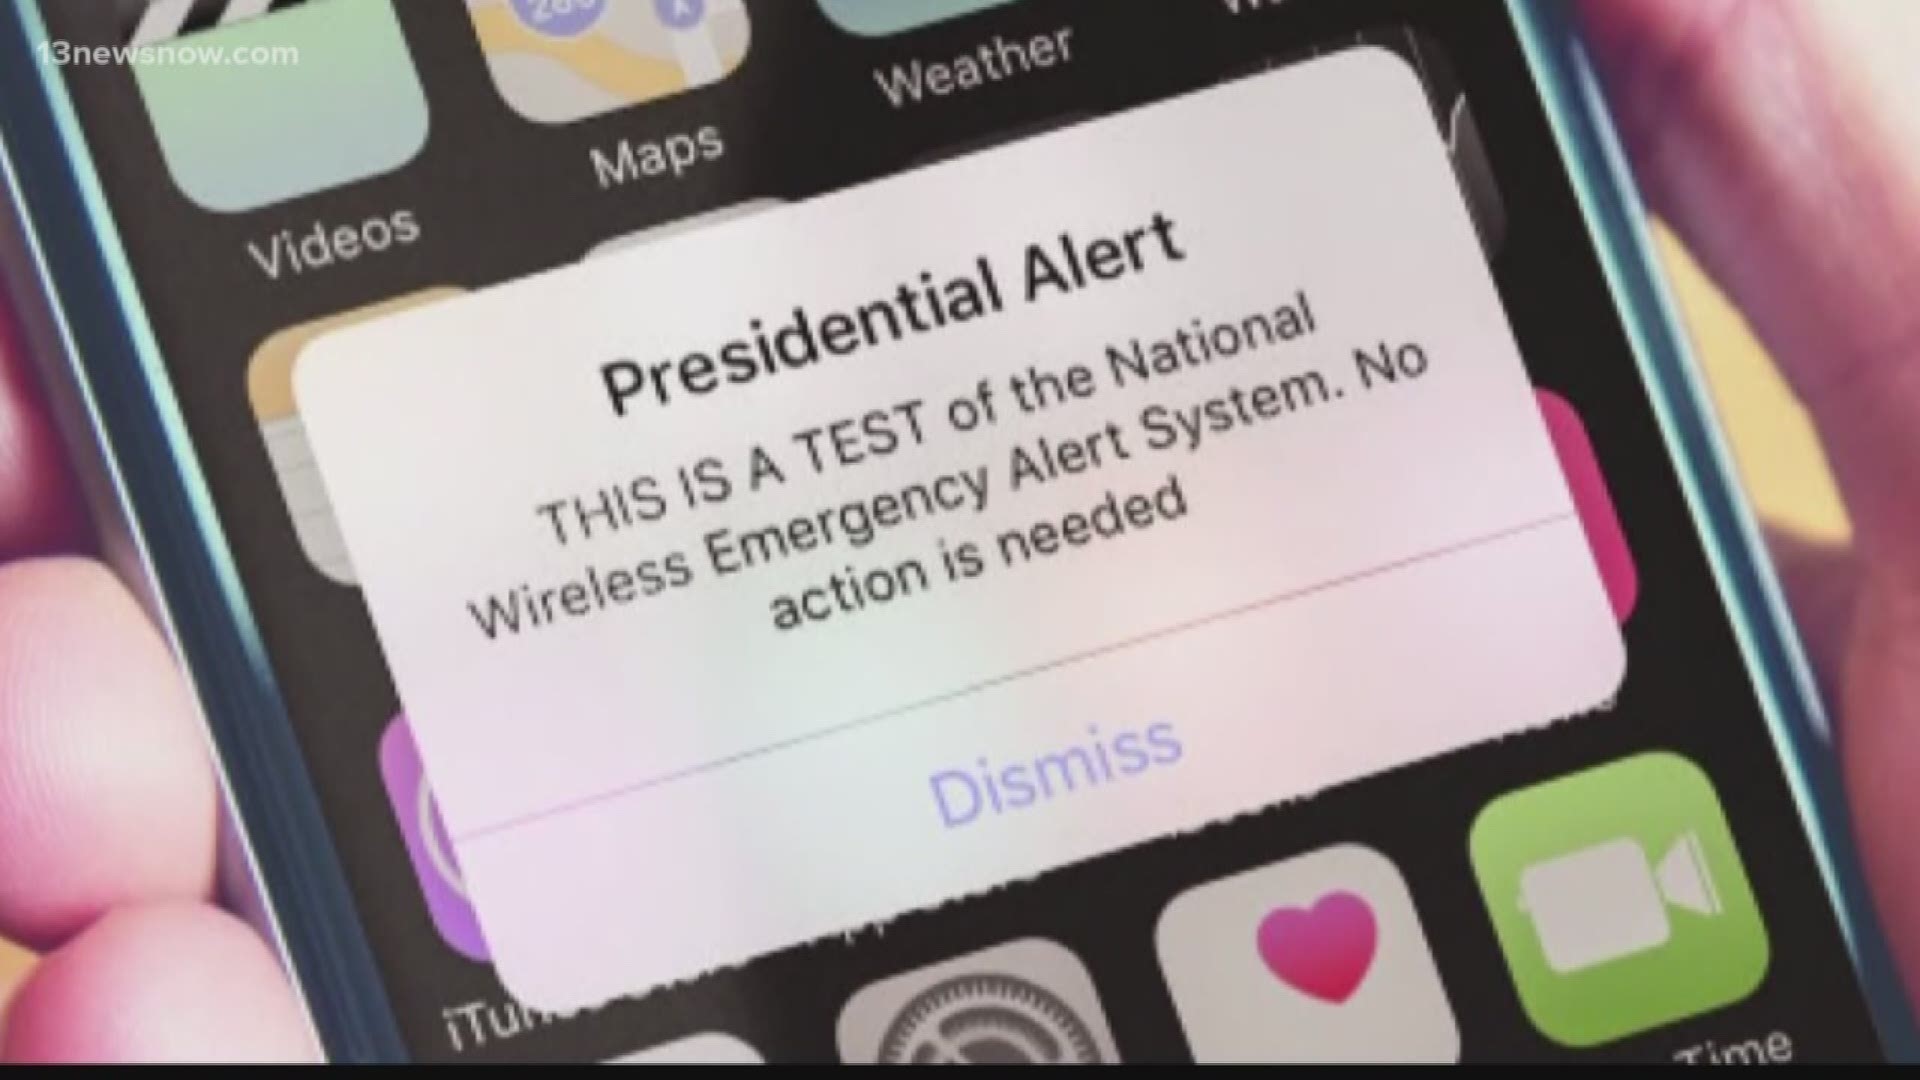 Cellphones across the country were buzzing after a FEMA Presidential Alert